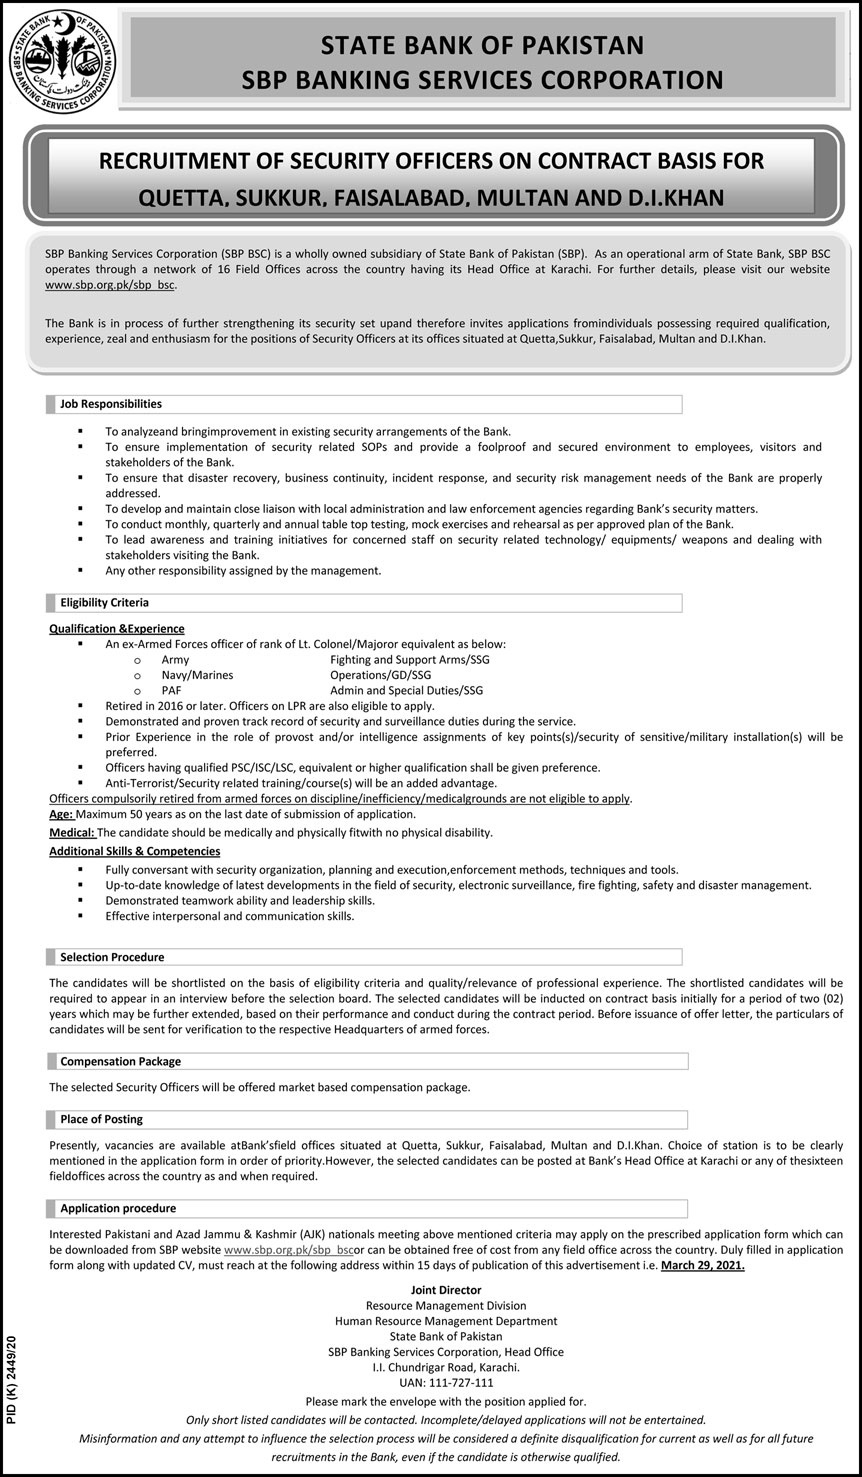 State Bank Jobs 2021 - State Bank Of Pakistan Careers - SBP Careers - SBP Jobs 2021 - www.sbp.org.pk Jobs 2021